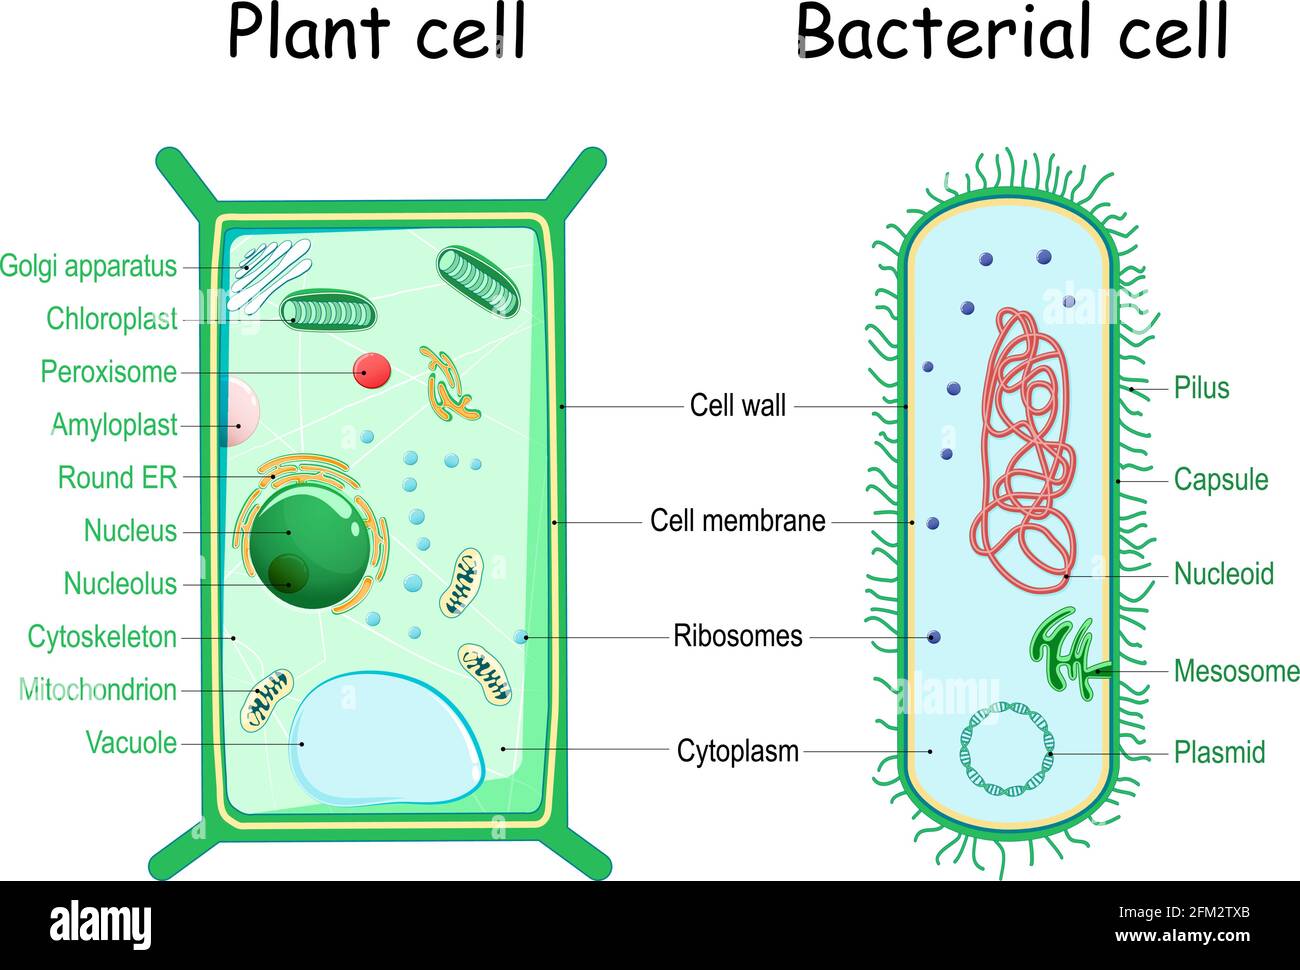 bacteria and plant cell. comparison of cell structure. Similarities and differences. cross section and anatomy of cell. Biology Chart. Vector Stock Vector